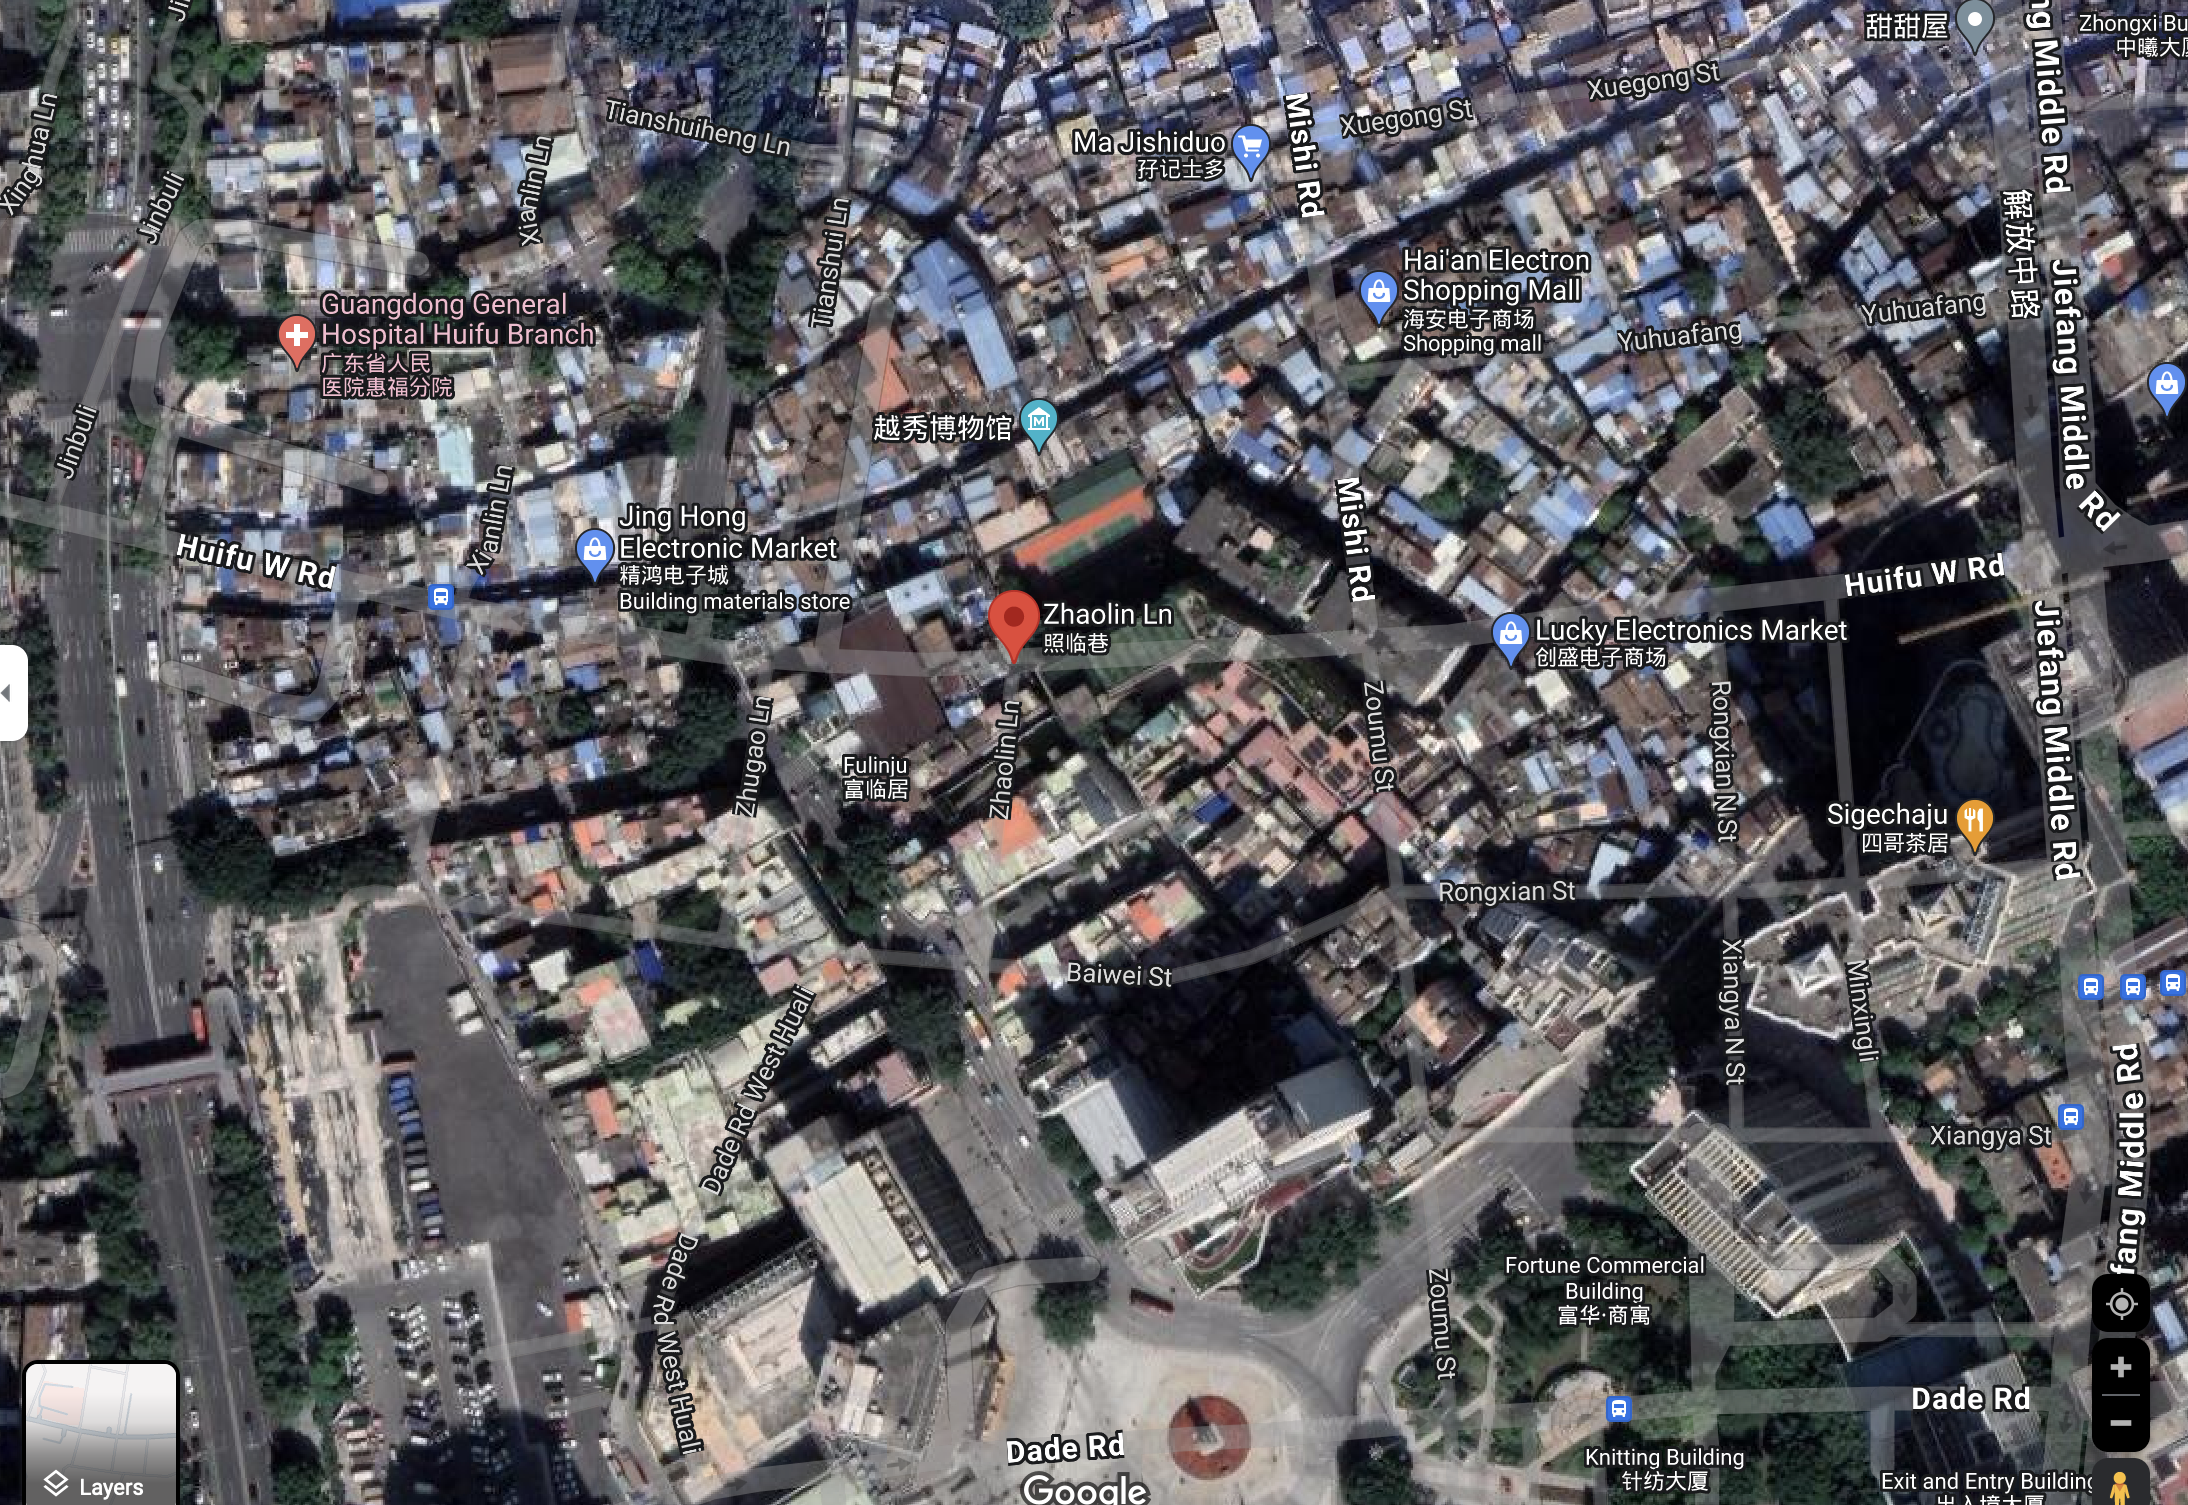 screenshot of Google Maps, where overlaid streets do not align with satellite imagery